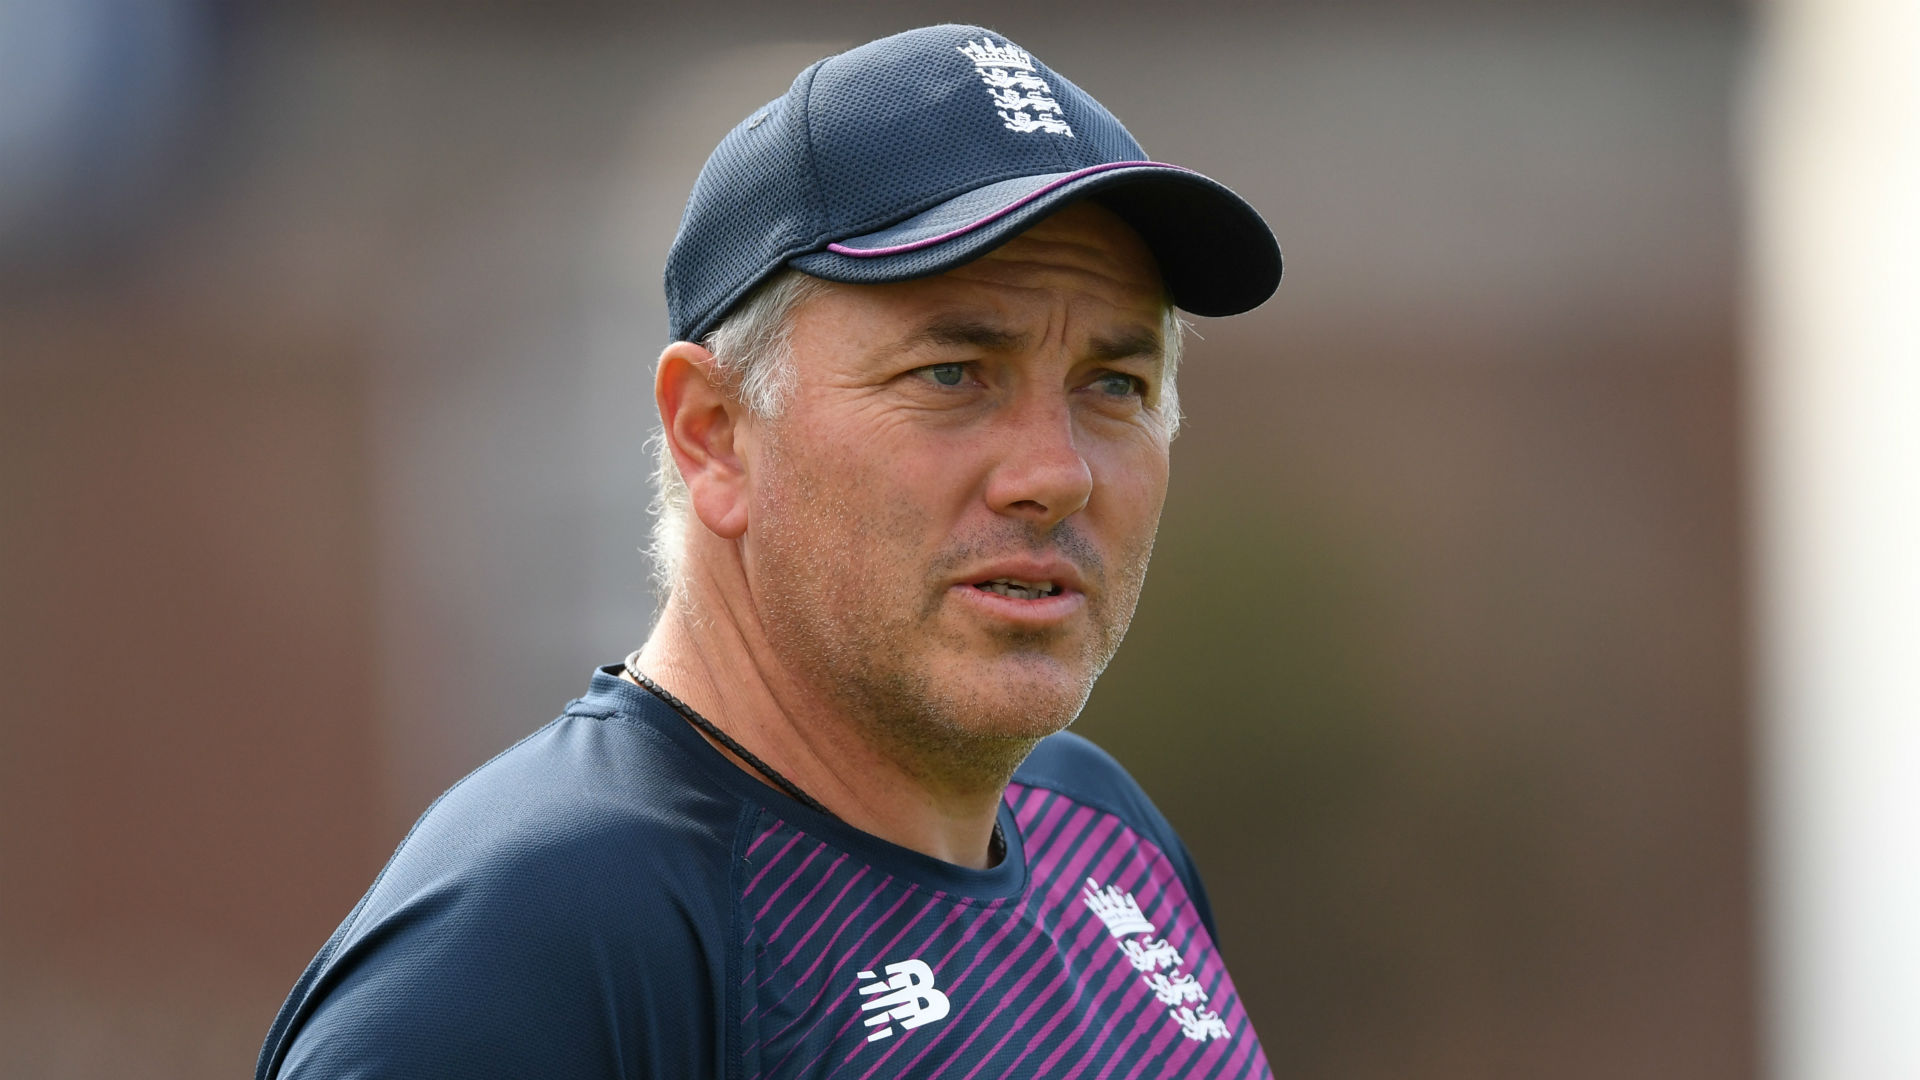 England appointed Chris Silverwood as their new coach on Monday, yet Kevin Pietersen is concerned about his lack of experience.